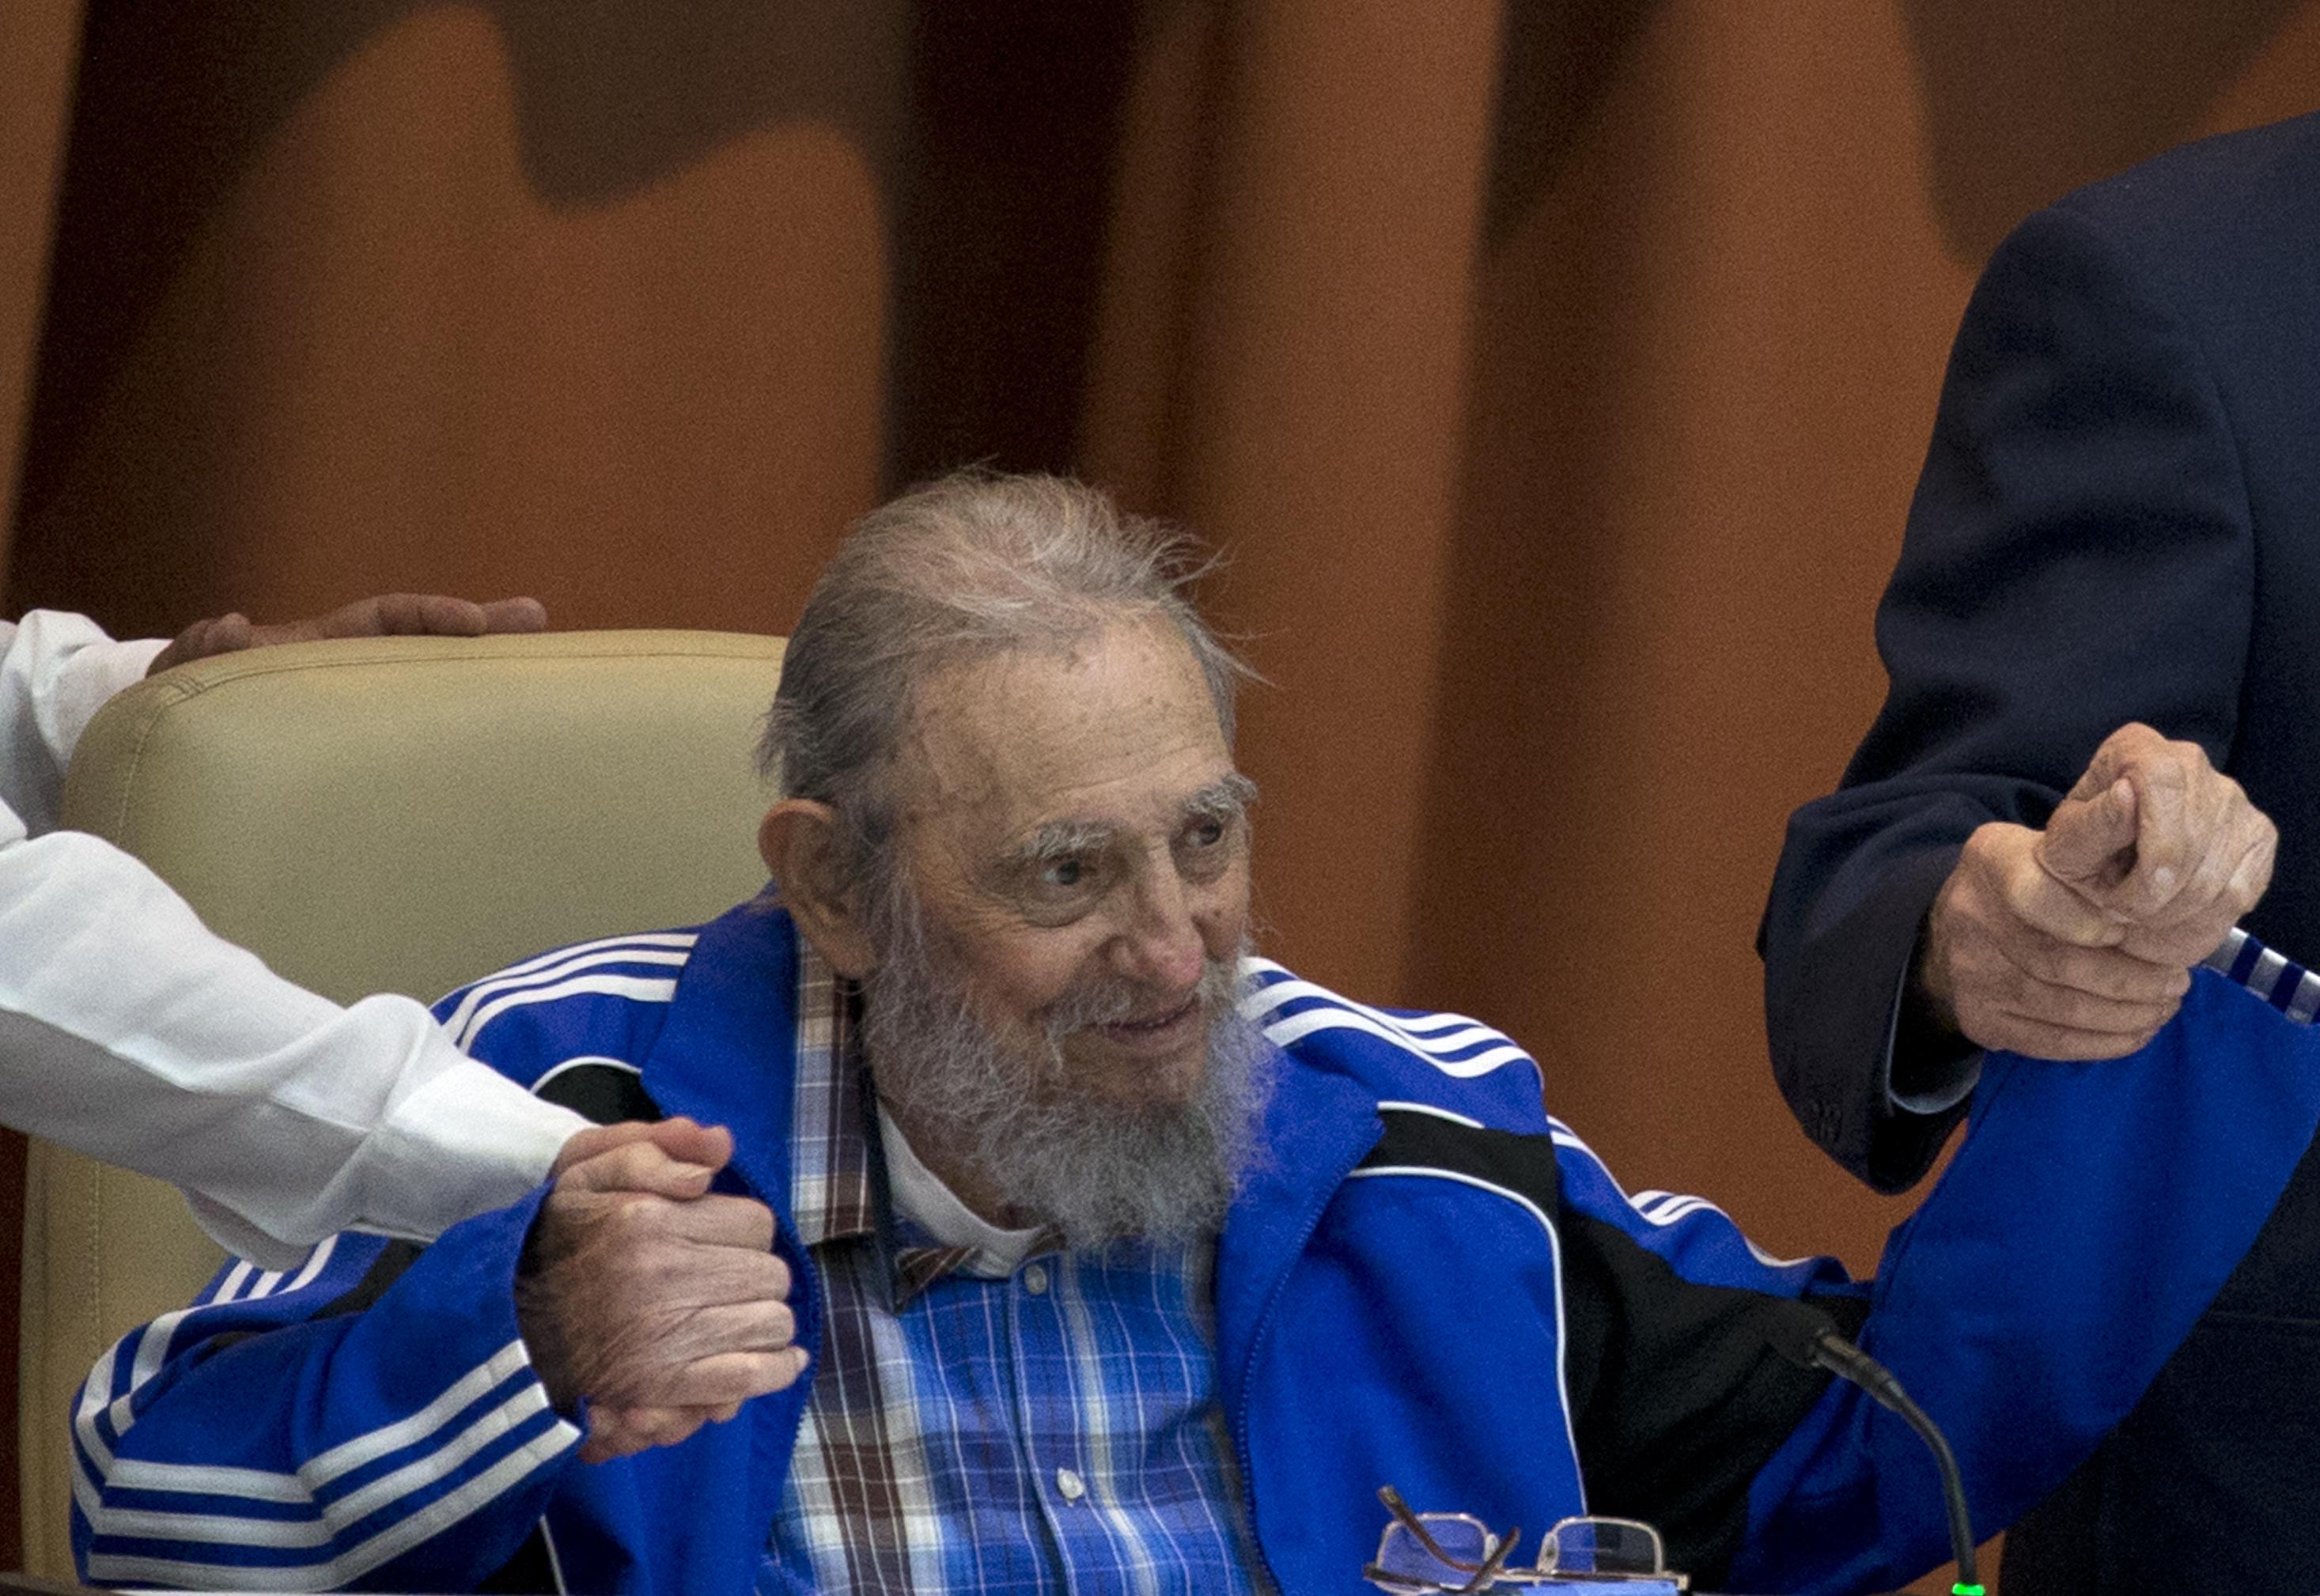 Biography of Fidel Castro, Cuban President for 50 Years